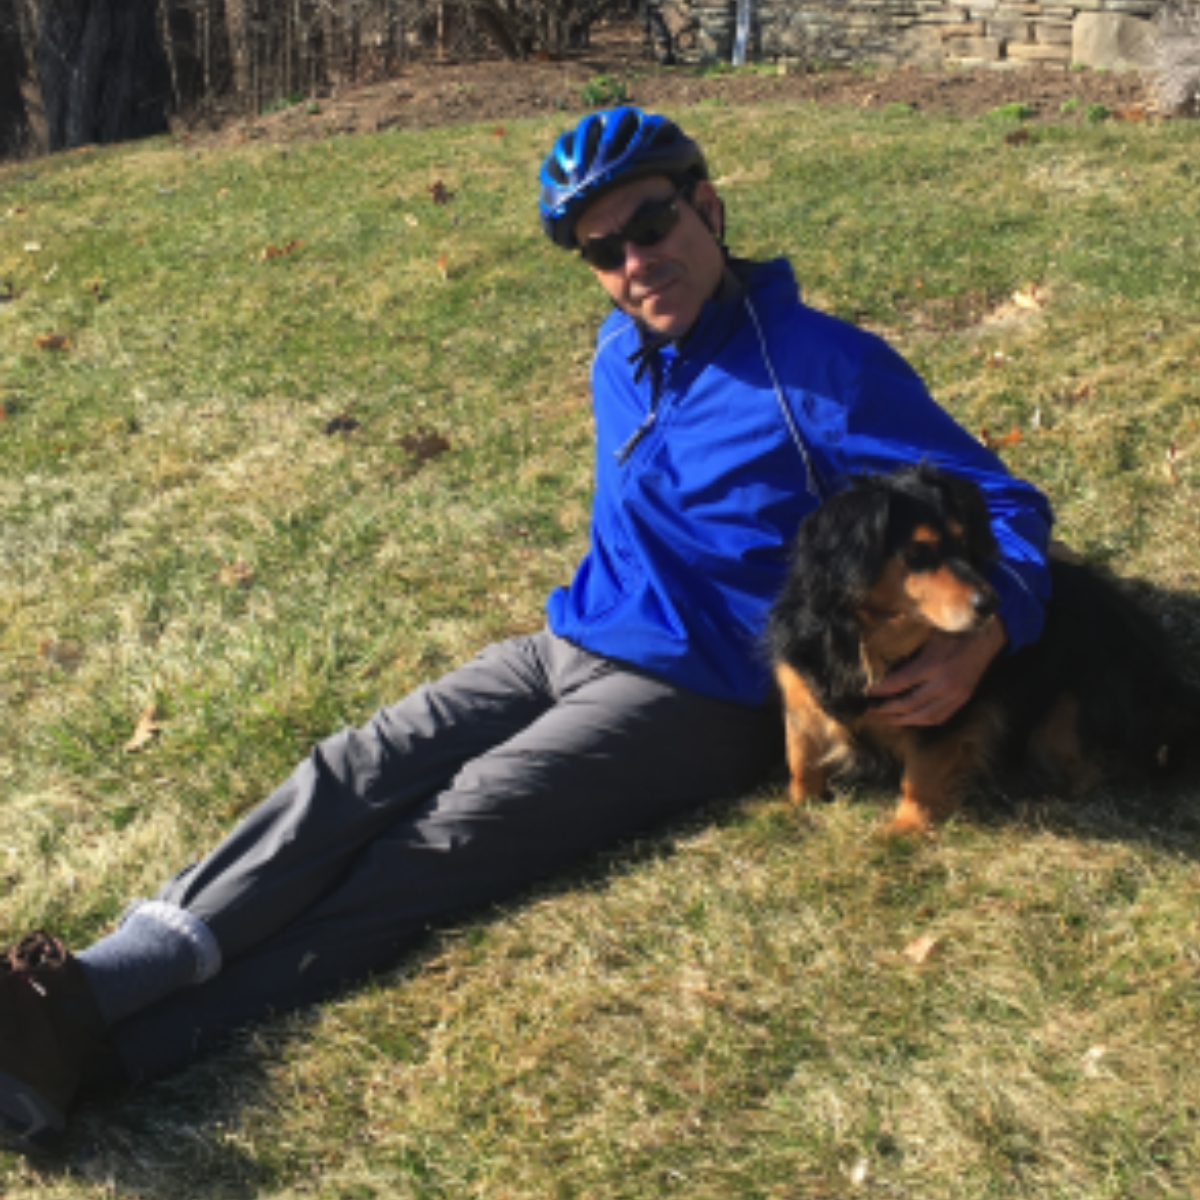 Gidon Eshel wearing a blue shirt and blue bicycle helmet, sitting on hill with his dog.